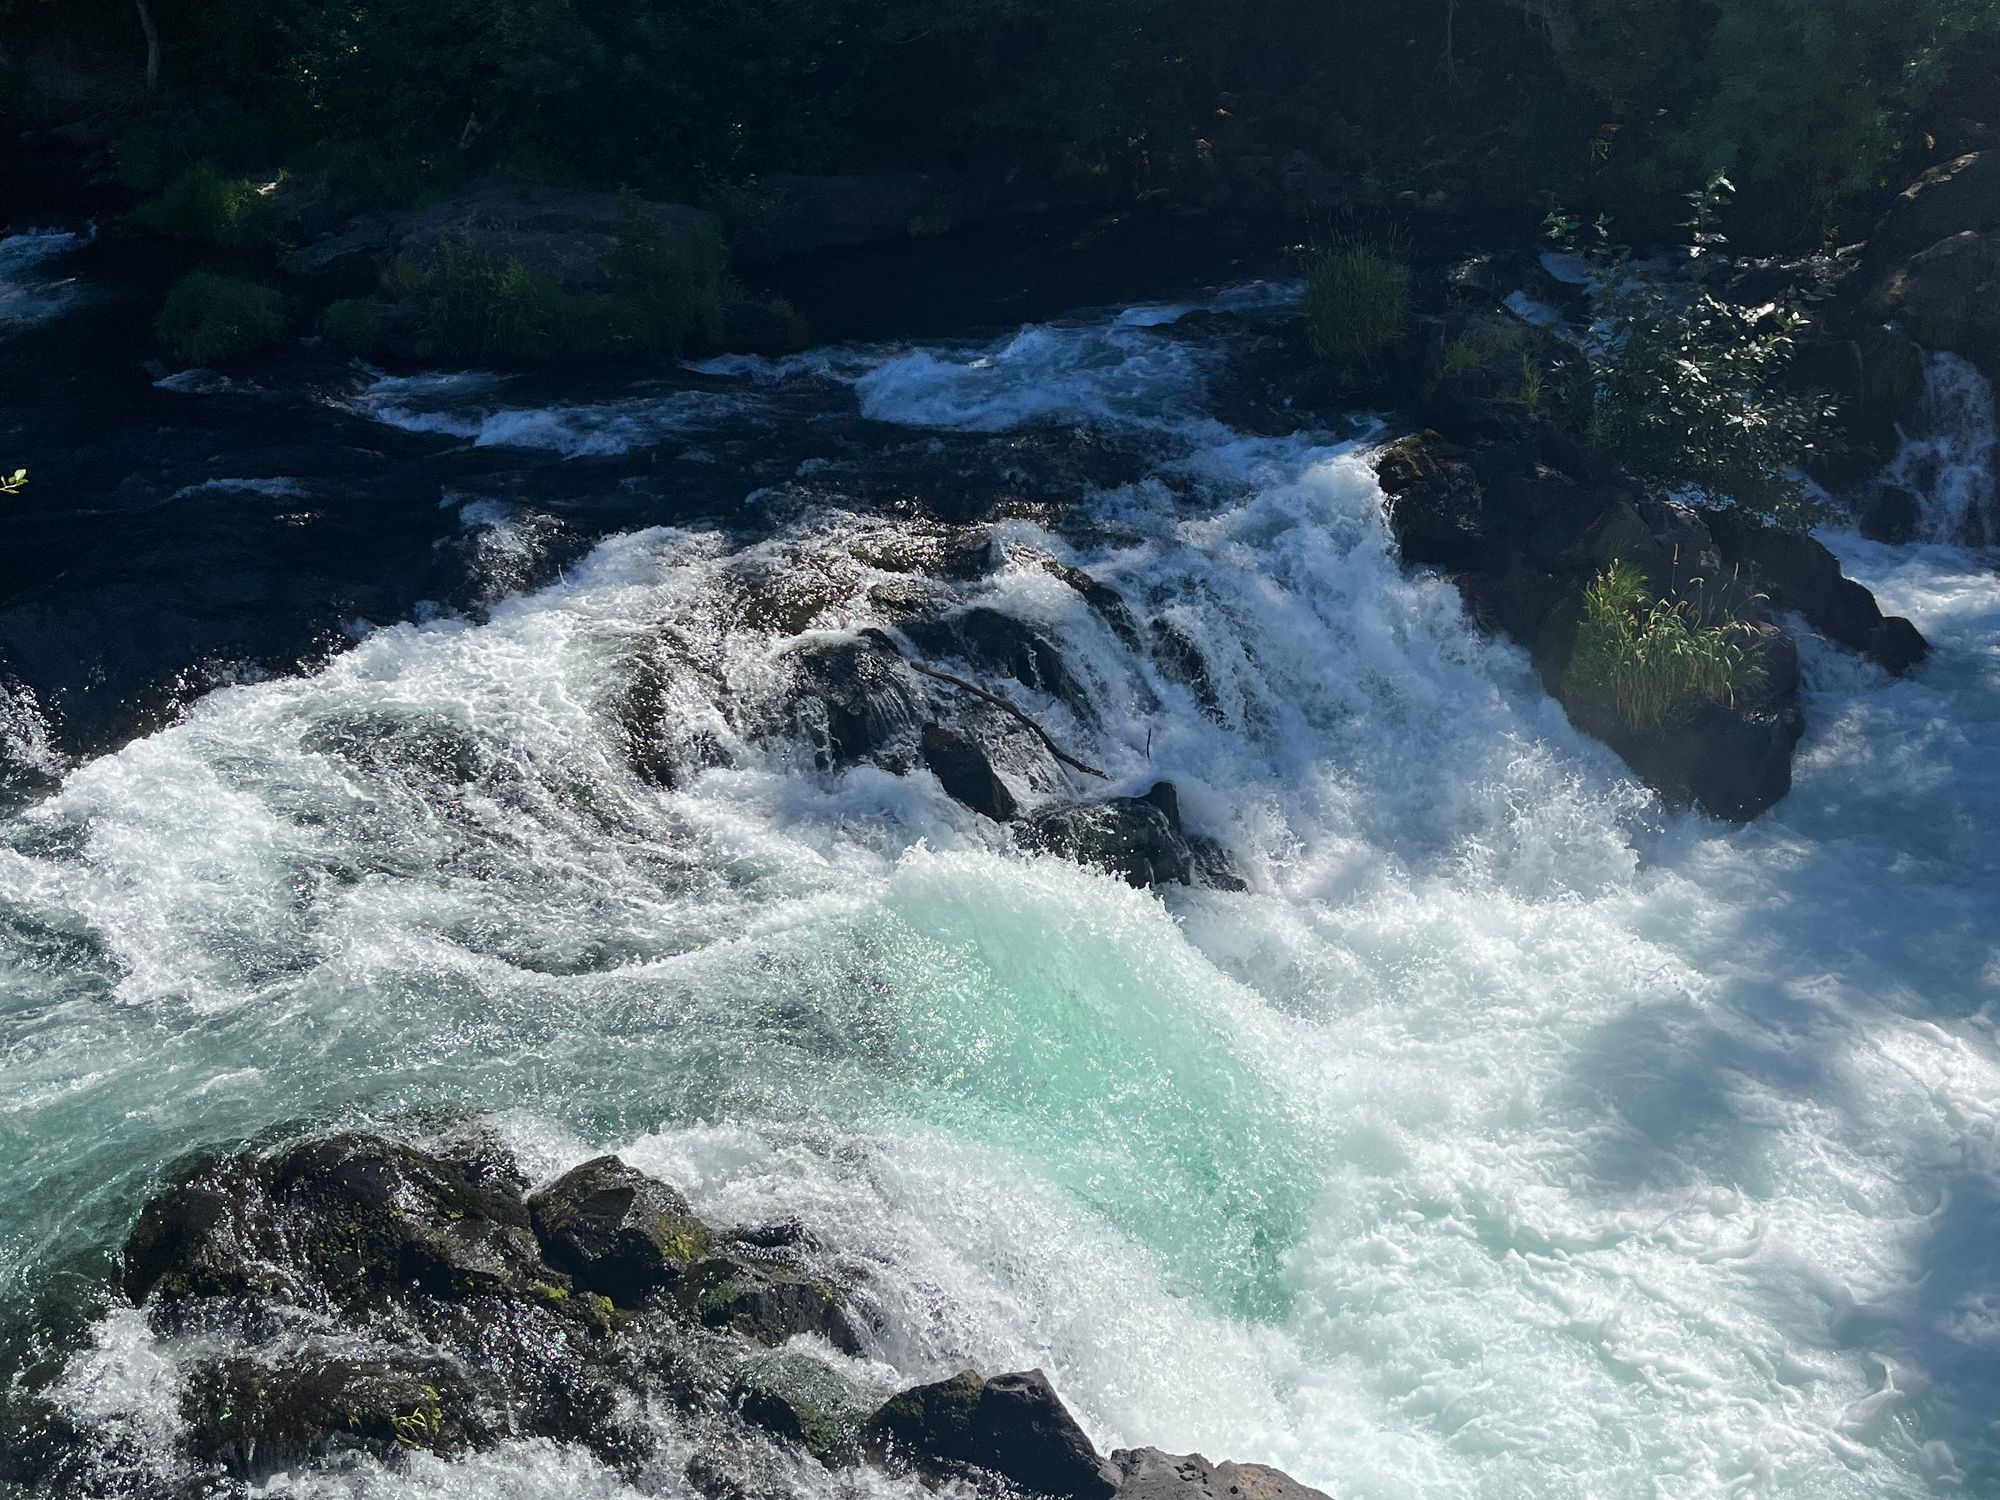 Whitewater rapids along the White Salmon river